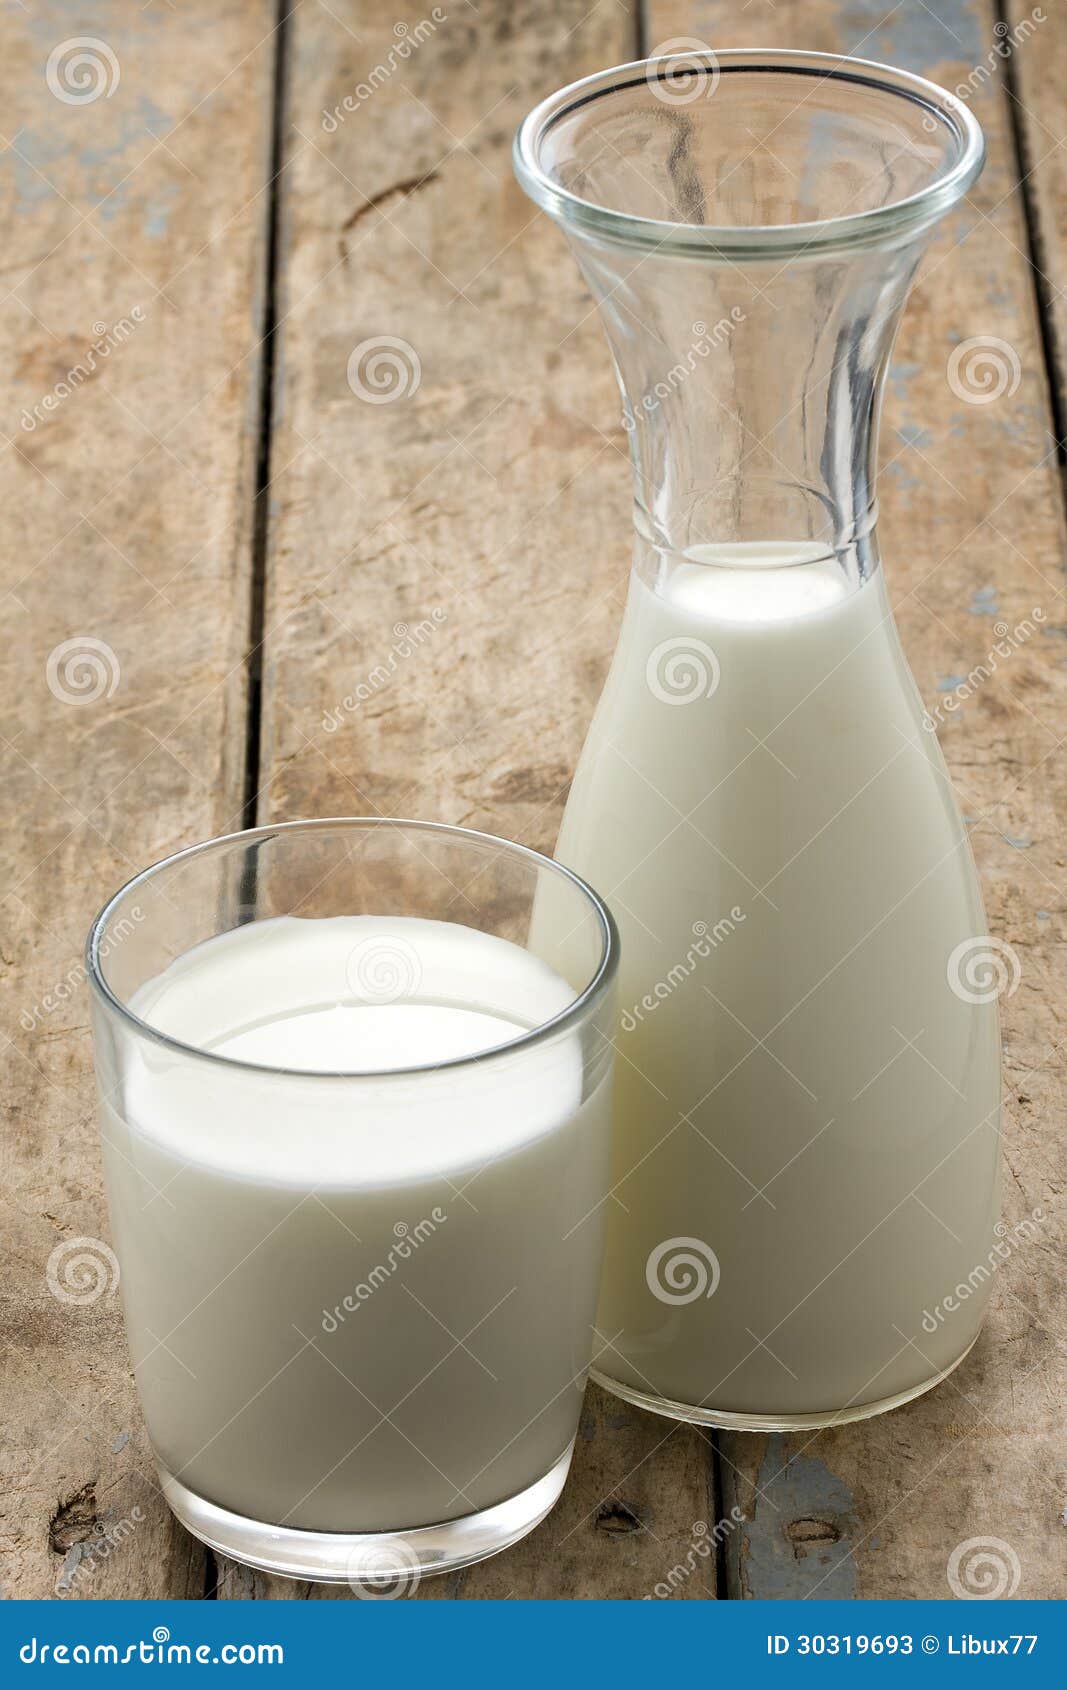 glass jug and glass with milk